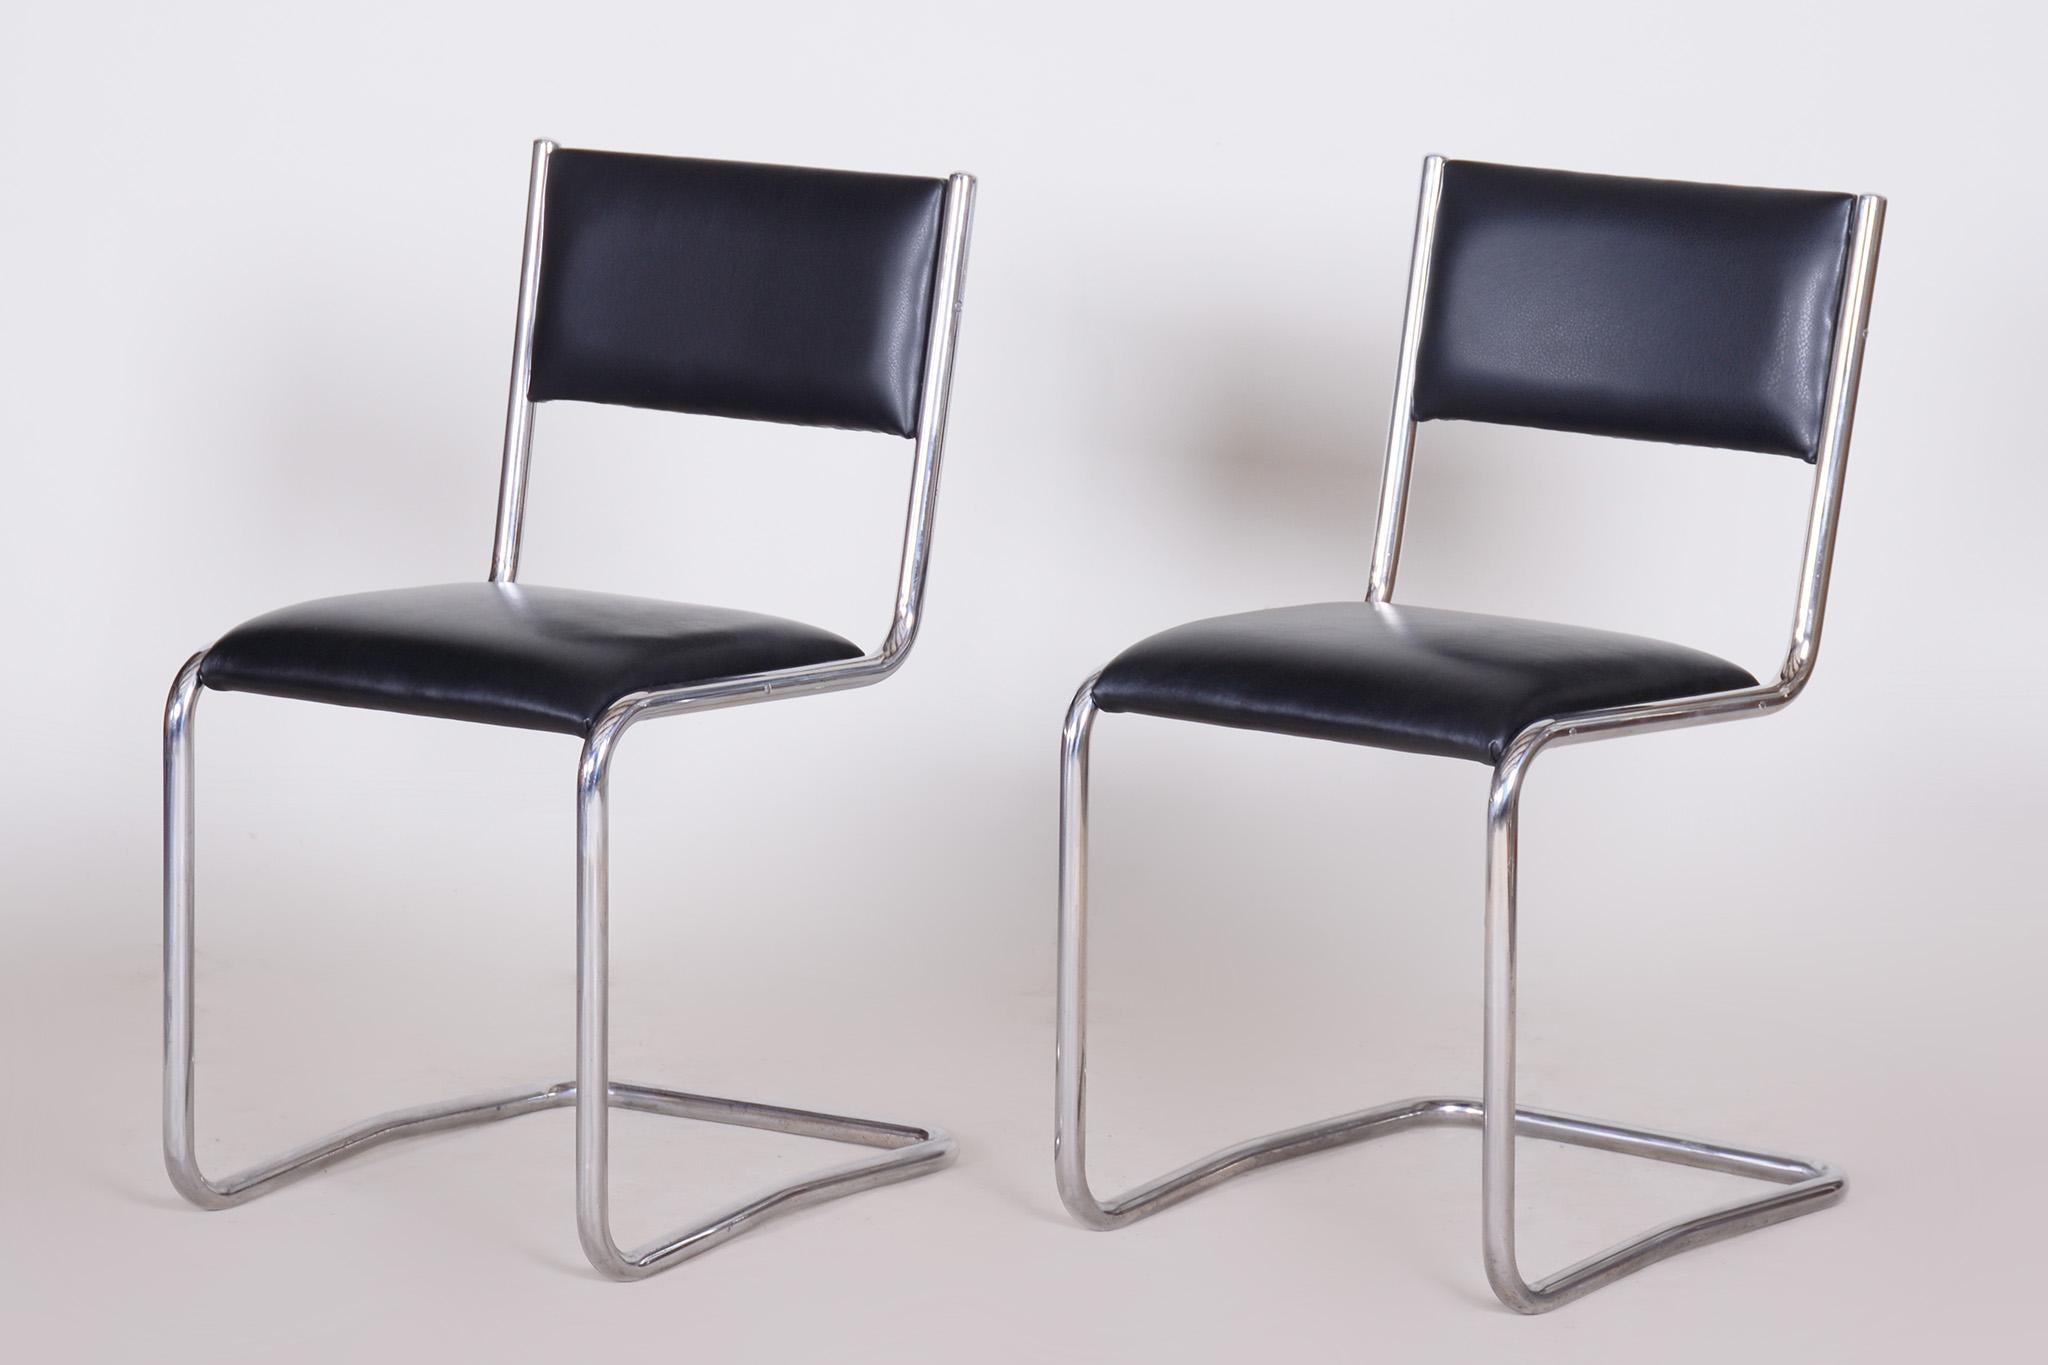 Black Leather Bauhaus Chairs, 1930s Czechia For Sale 6